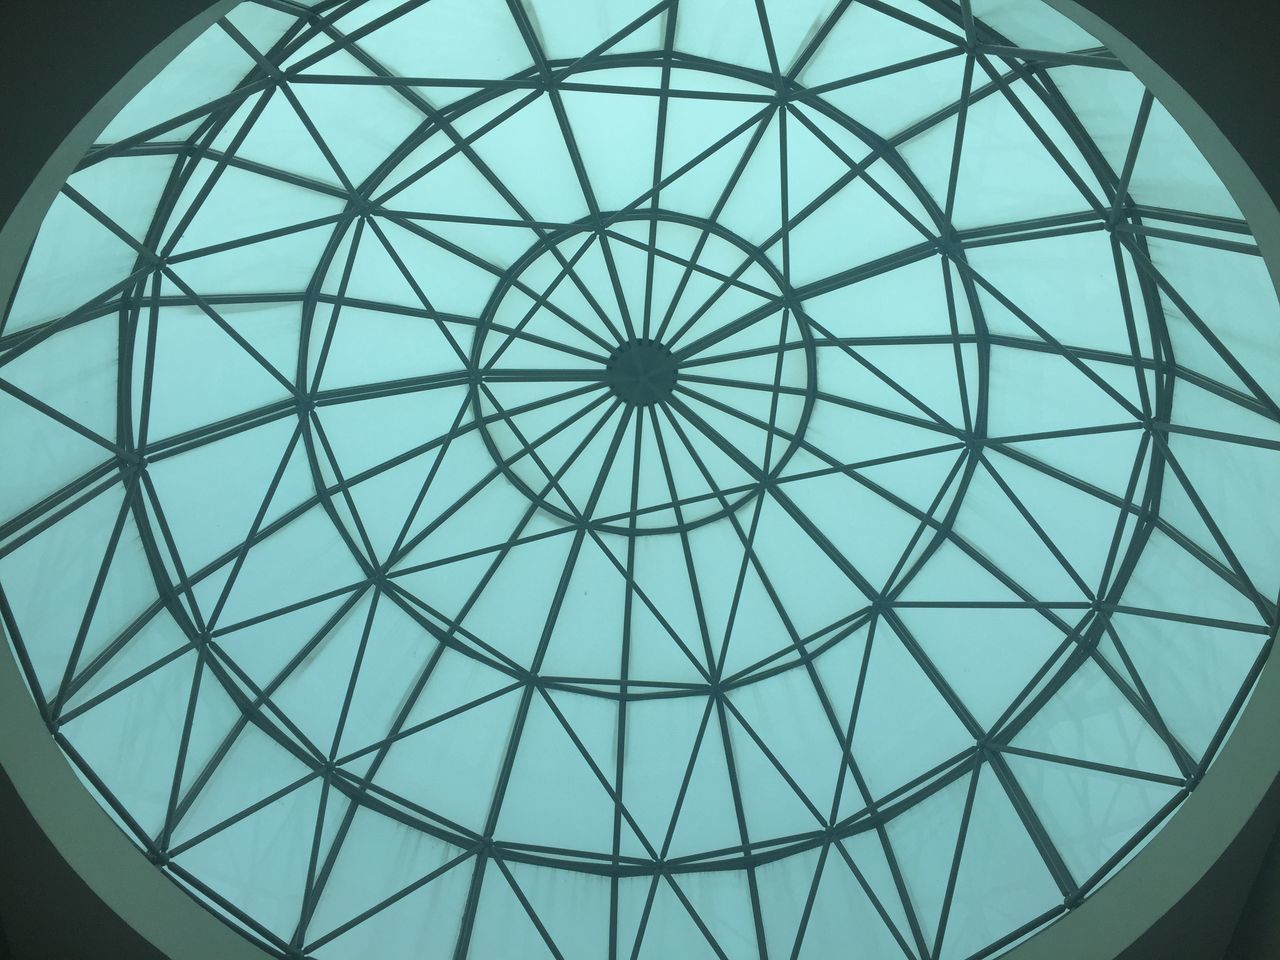 LOW ANGLE VIEW OF ARCHITECTURAL CEILING